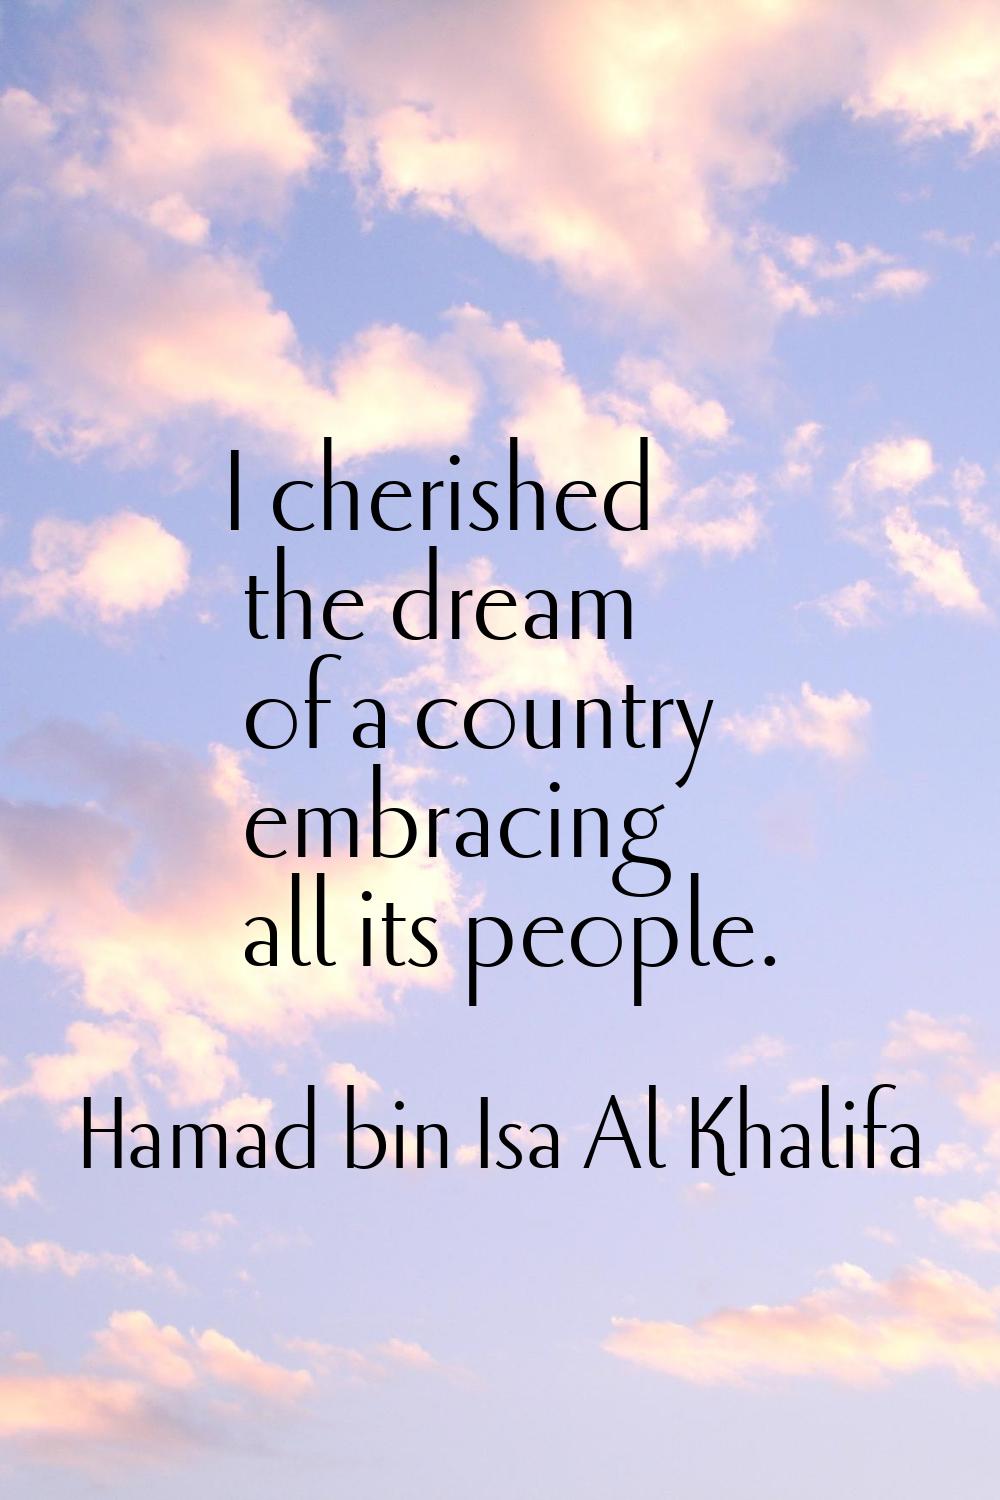 I cherished the dream of a country embracing all its people.